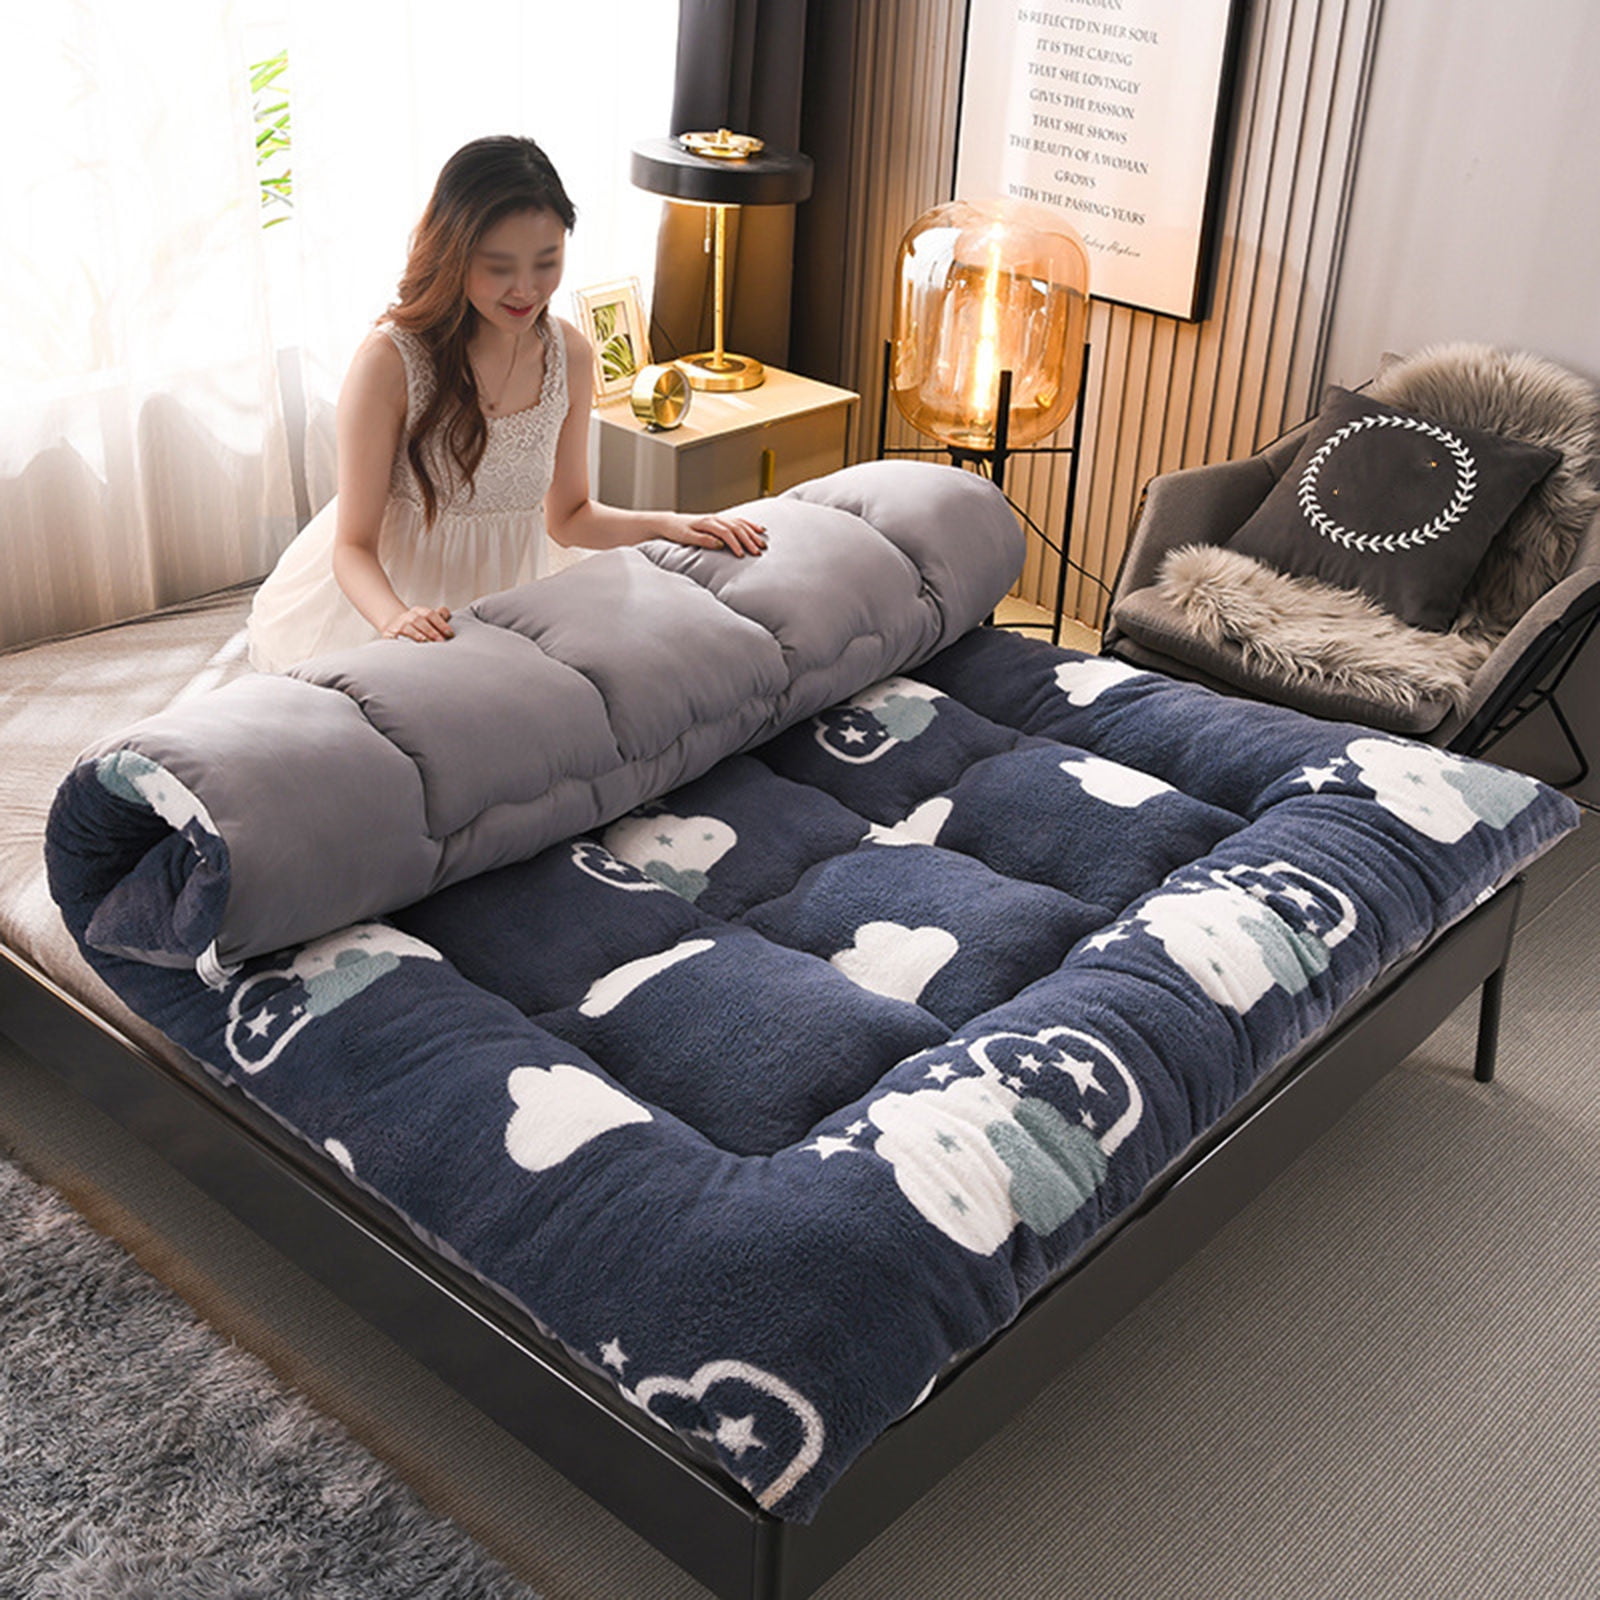 Japanese Folding Futon Mattress Single Double Thicken Portable Floor Mattress Soft Breathable Tatami Mat For Outdoor Camping Dormitory clouds-71*79inch Walmart.com